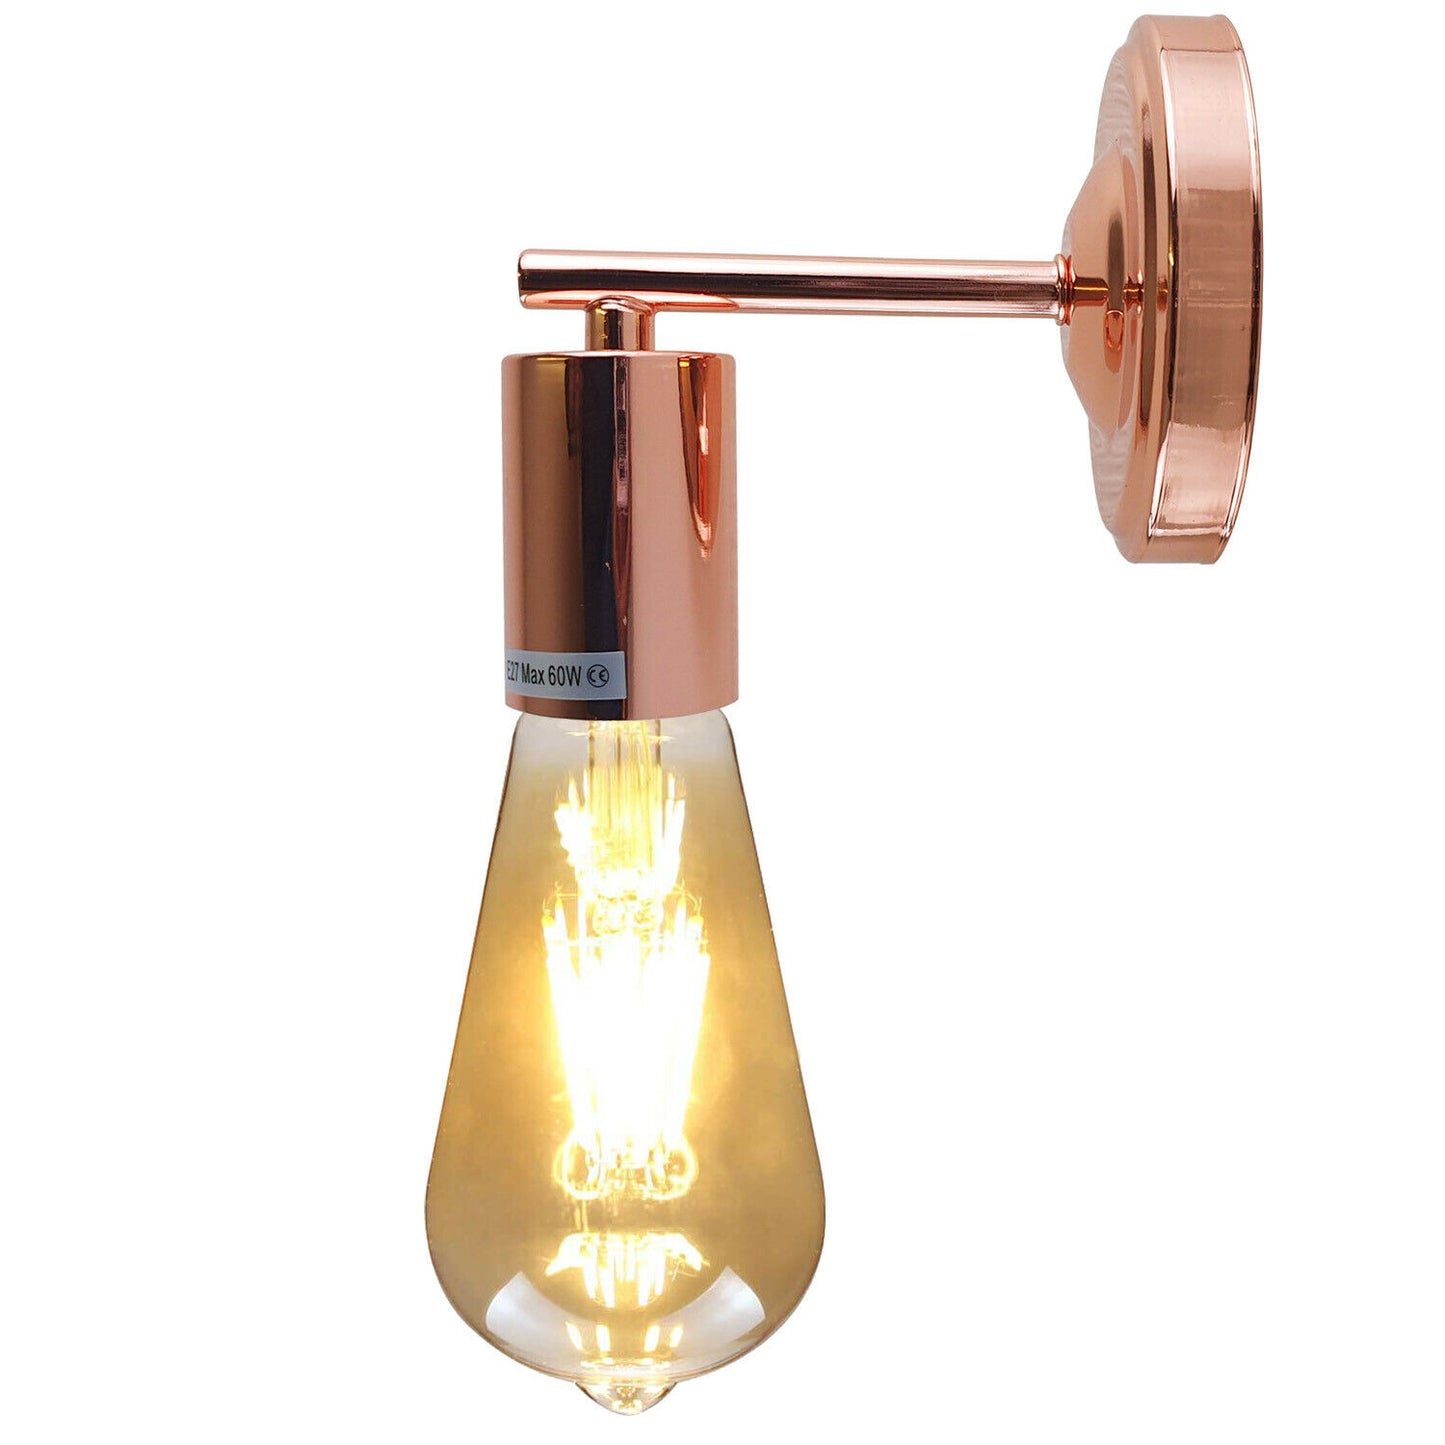 Vintage Charm-Rose Gold Retro Metal Wall Sconce with E27 Lamp Holder 